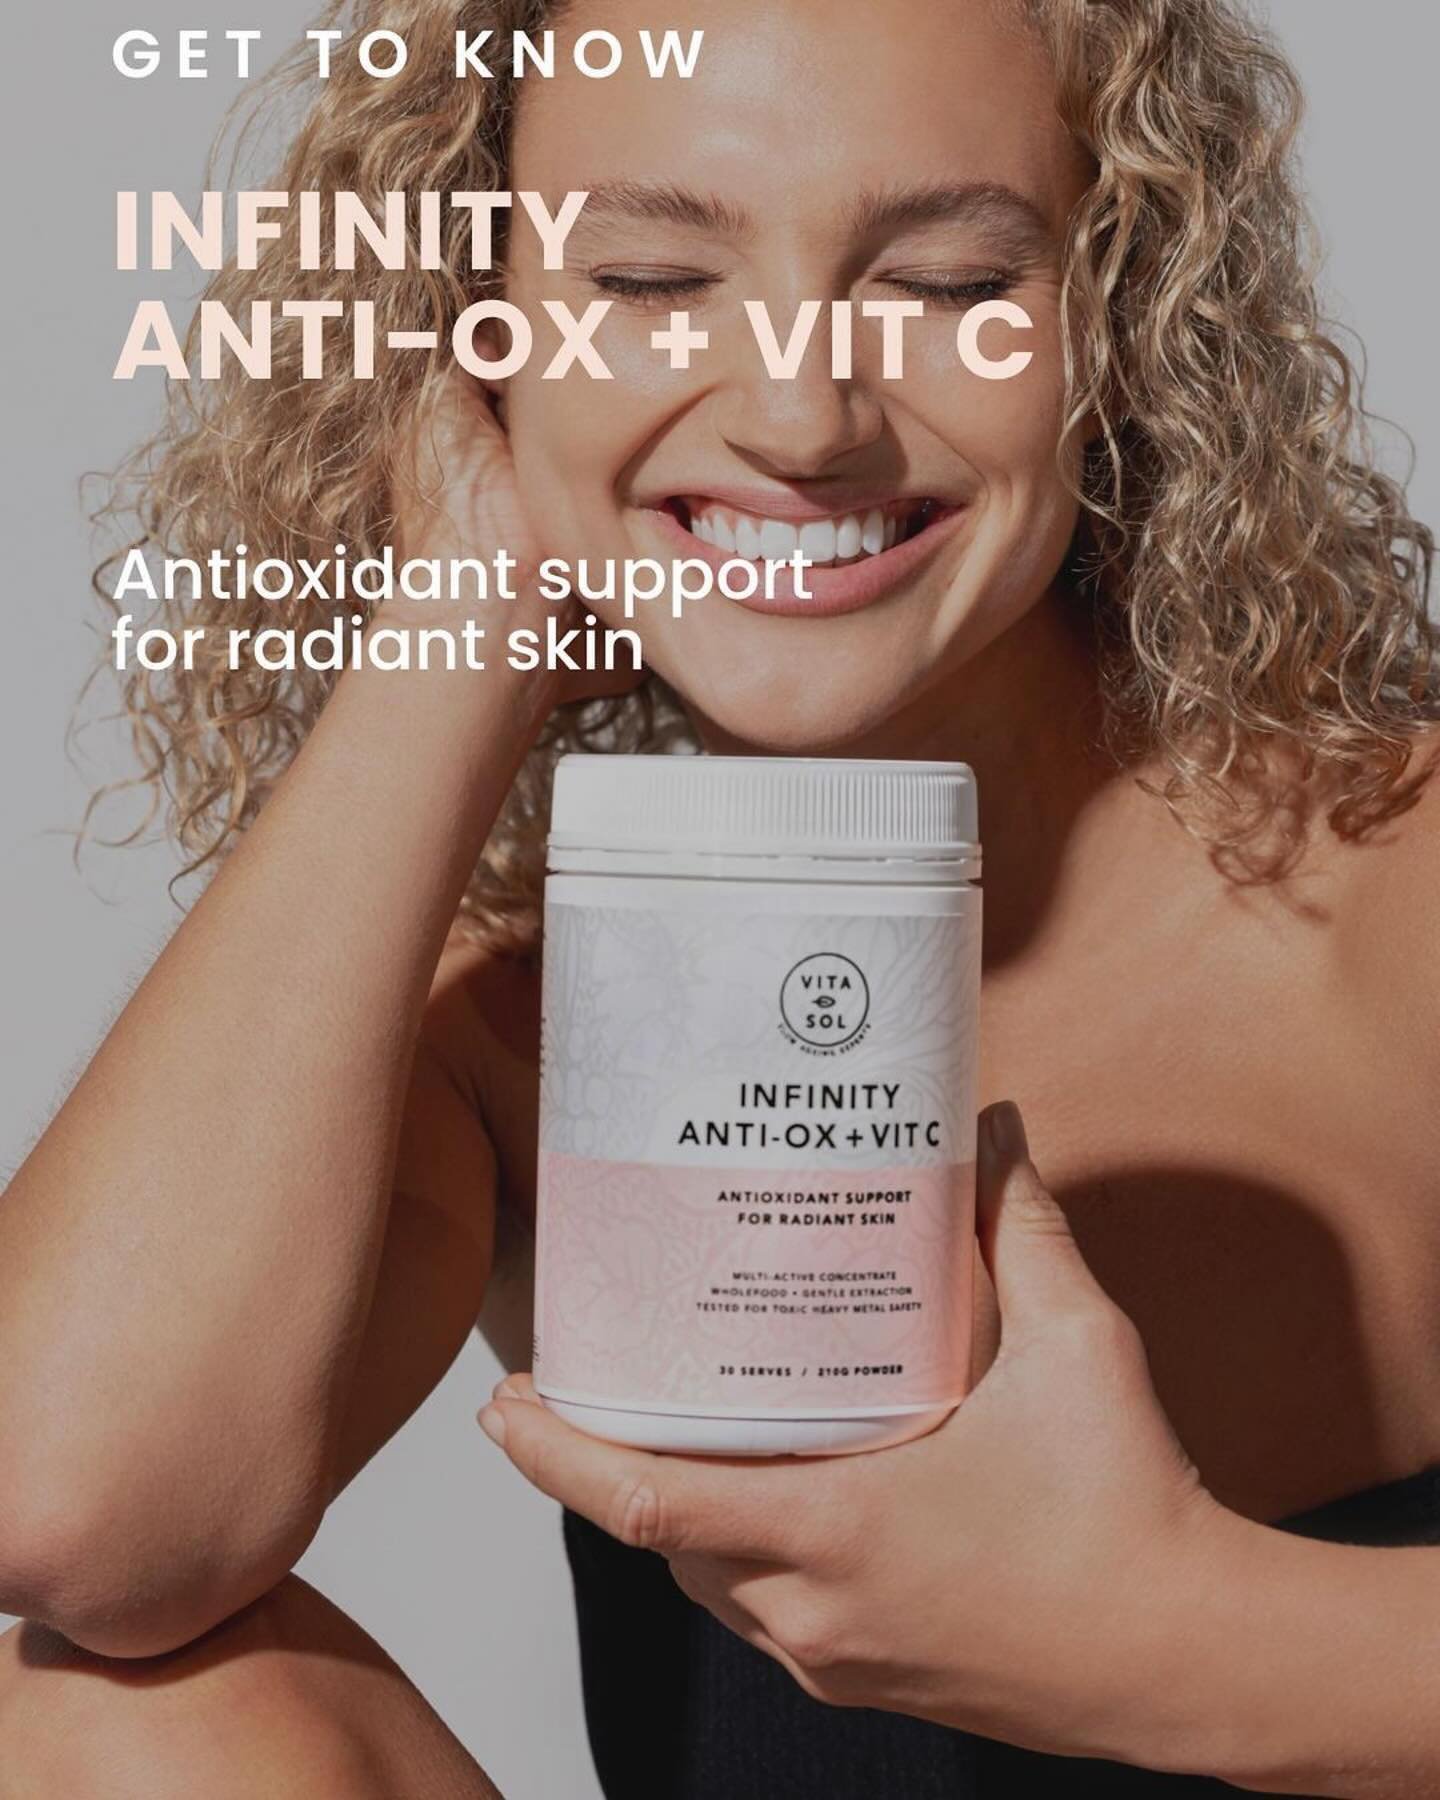 The maintenance of the cellular integrity and immune mechanisms of our skin involves a series of natural biochemical reactions that generate free radicals. Free radical excess can lead to premature ageing and pigmentation of the skin. Antioxidants, f